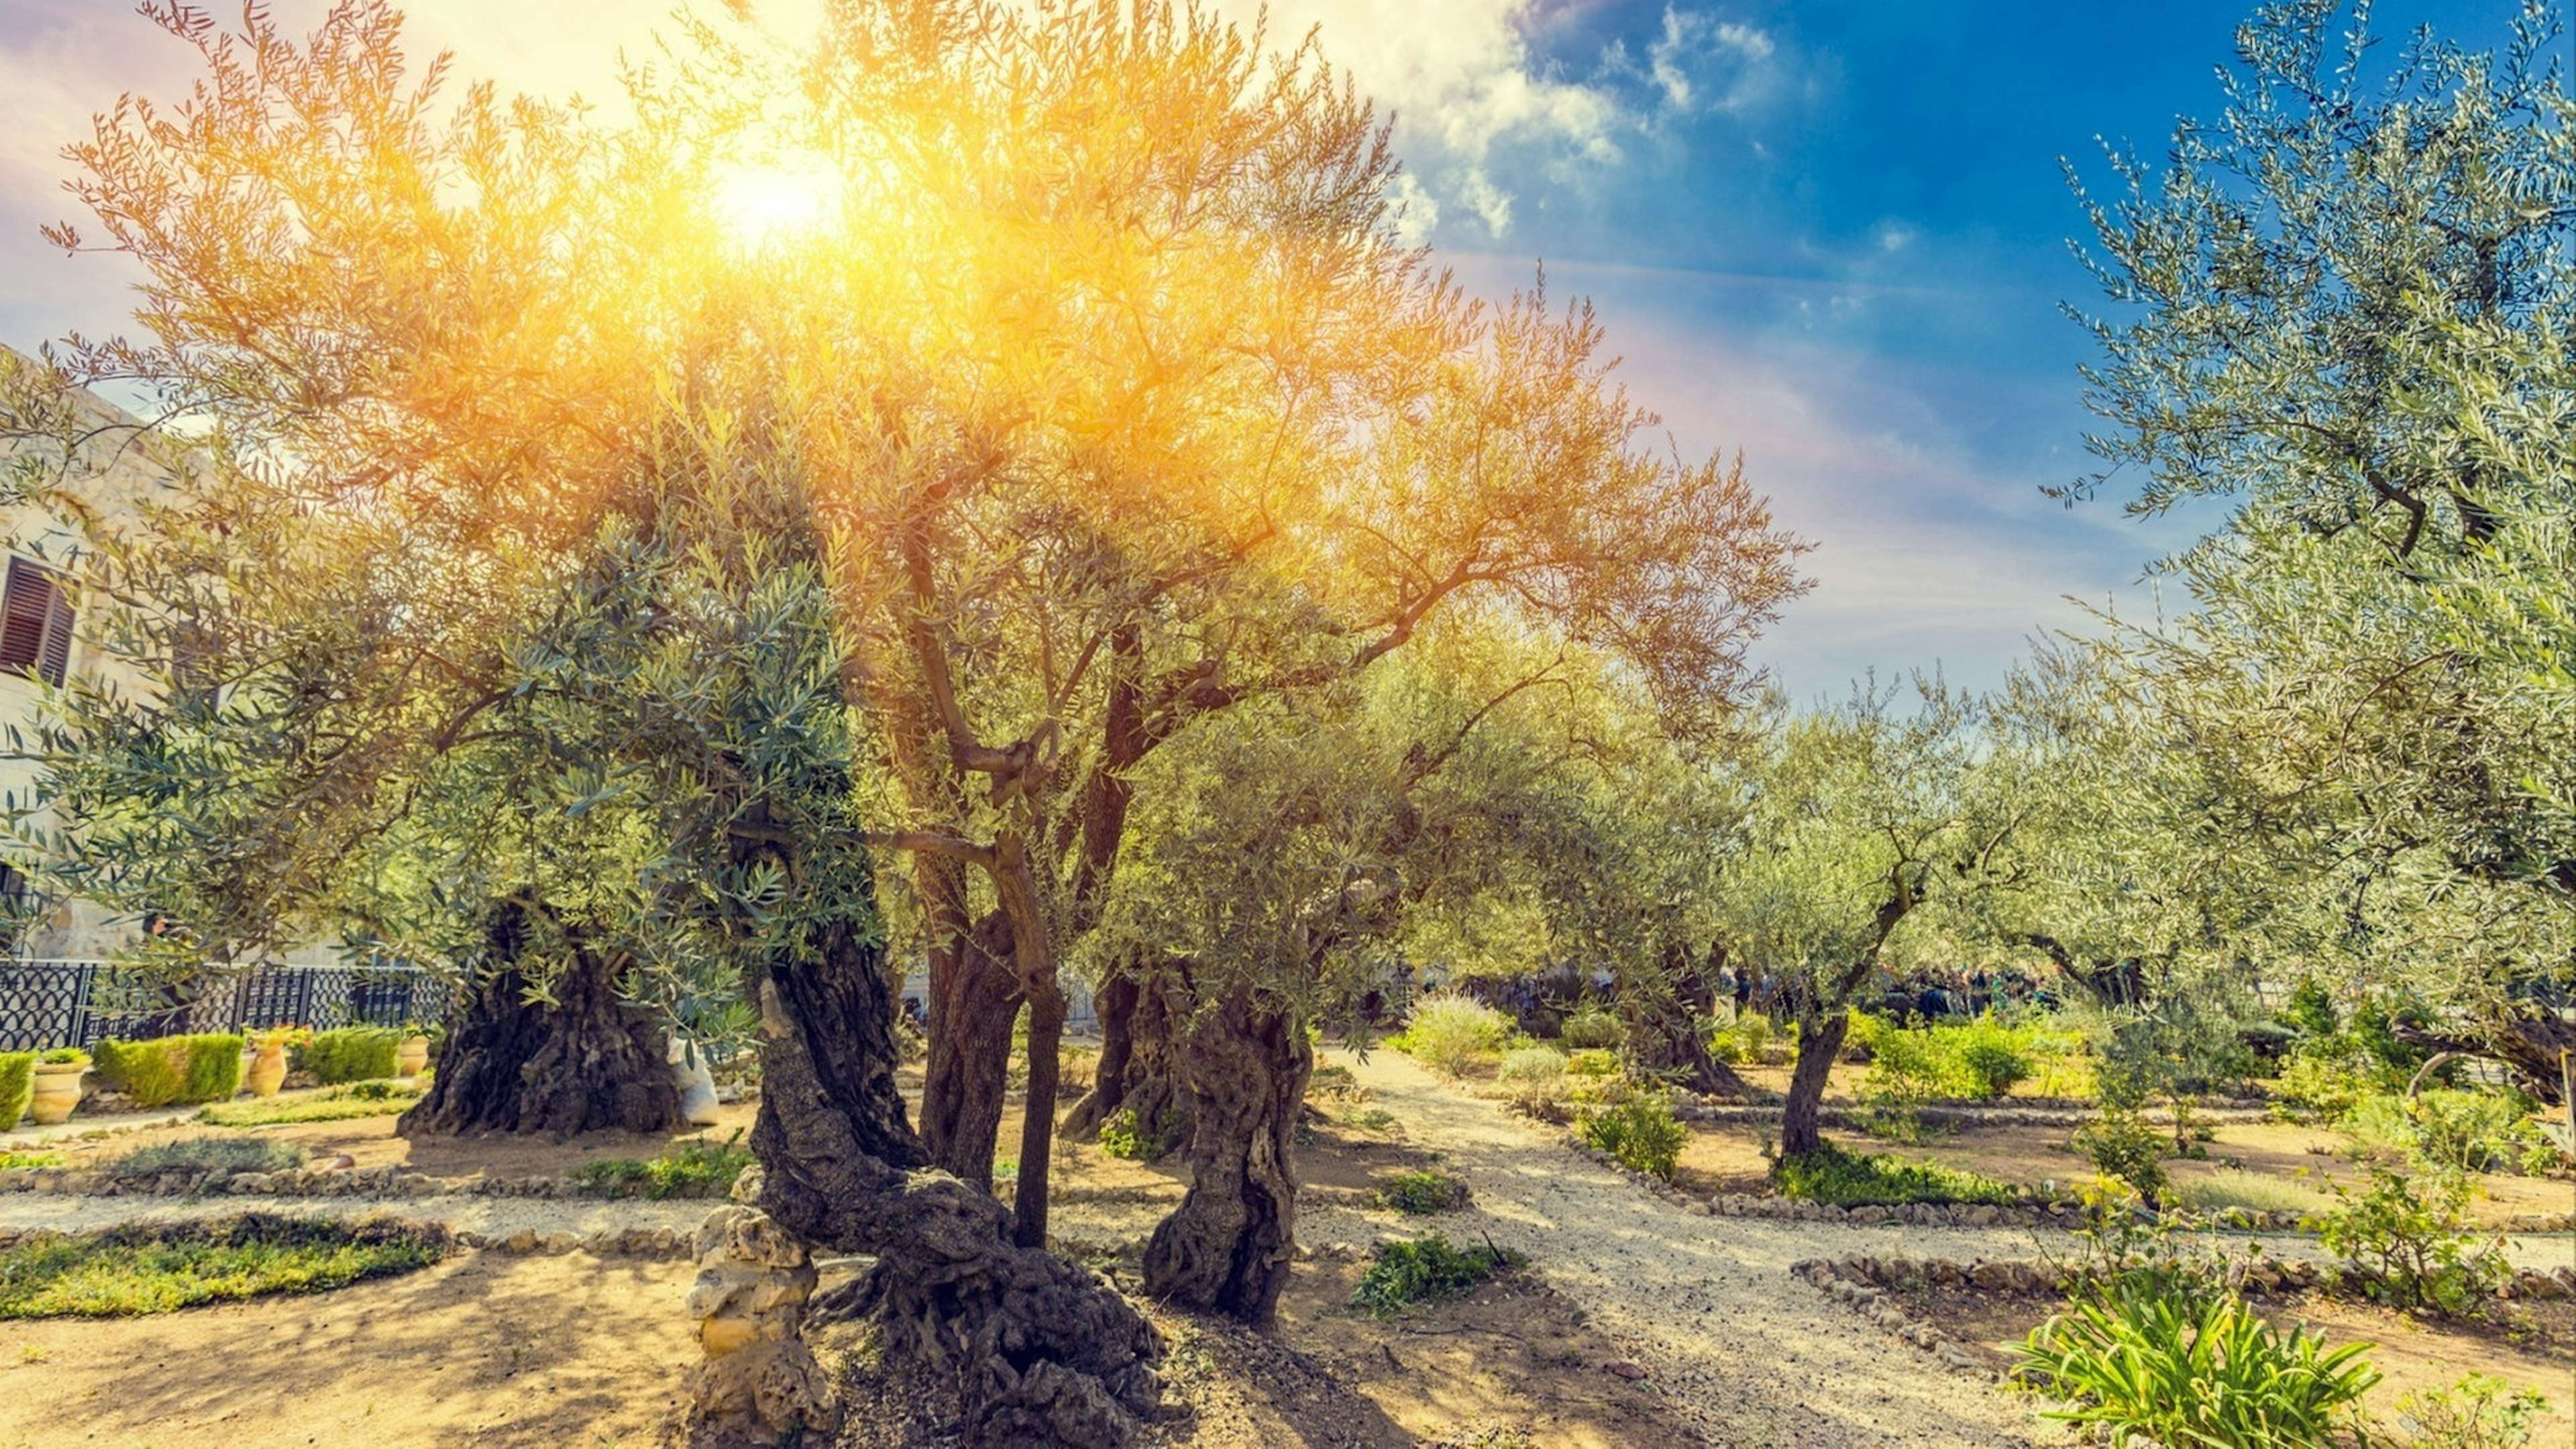 The Gethsemane Olive Orchard, Garden located at the foot of the Mount of Olives